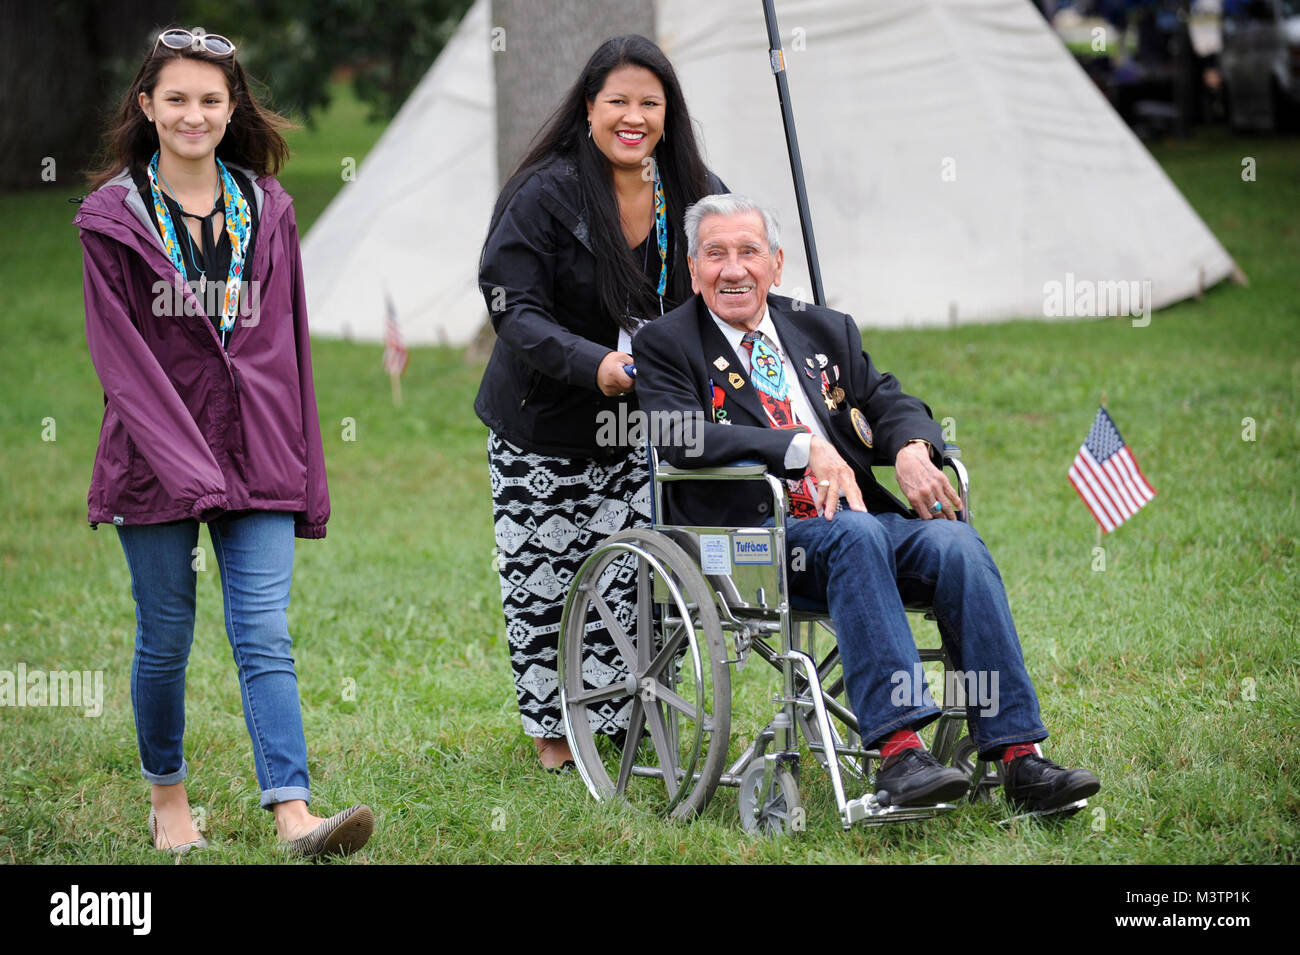 World War II /Korean War Native American Veteran and first wave D-Day survivor, Mr. Norman Shay (foreground), is escorted by Chicago Sympathy Orchestra National Anthem singer, Beena Davis, prior to breakfast during the 2nd Annual National Gathering of American Indian Veterans.  The event was held at Cantigny Park located in Wheaton, Illinois 19-21 August 2016.  The event celebrated the long and proud history of Native Americans’ service to the United States Military and honors all veterans American Indian style.   (DoD photo by Marvin Lynchard) 160821-D-FW736-001 by DoD News Photos Stock Photo